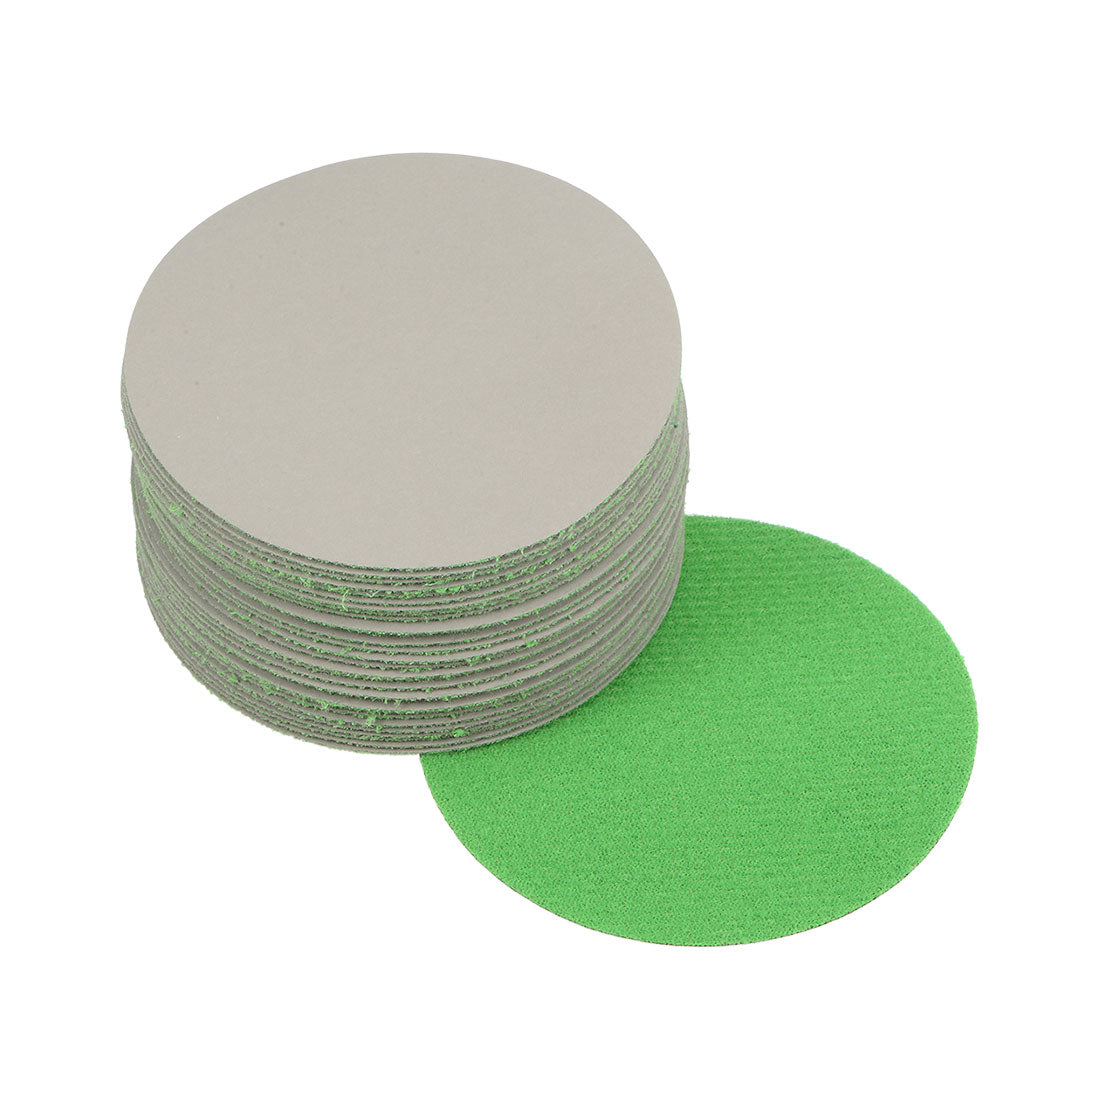 Uxcell Uxcell 3 inch Wet Dry Disc 7000 Grit Hook and Loop Sanding Disc Silicon Carbide 20pcs